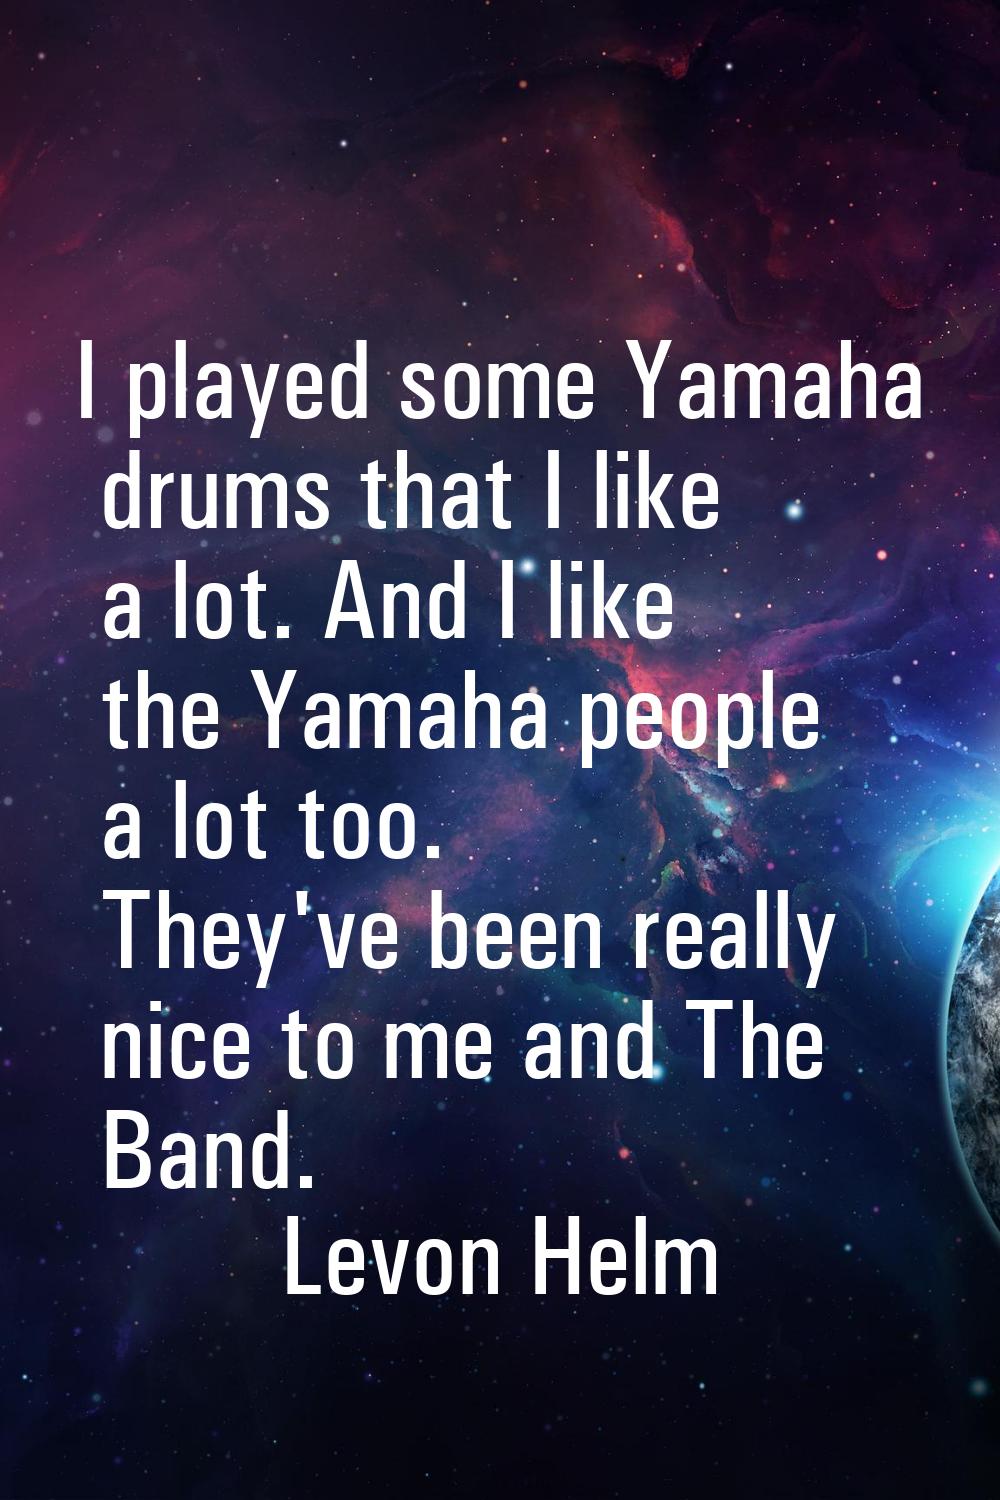 I played some Yamaha drums that I like a lot. And I like the Yamaha people a lot too. They've been 